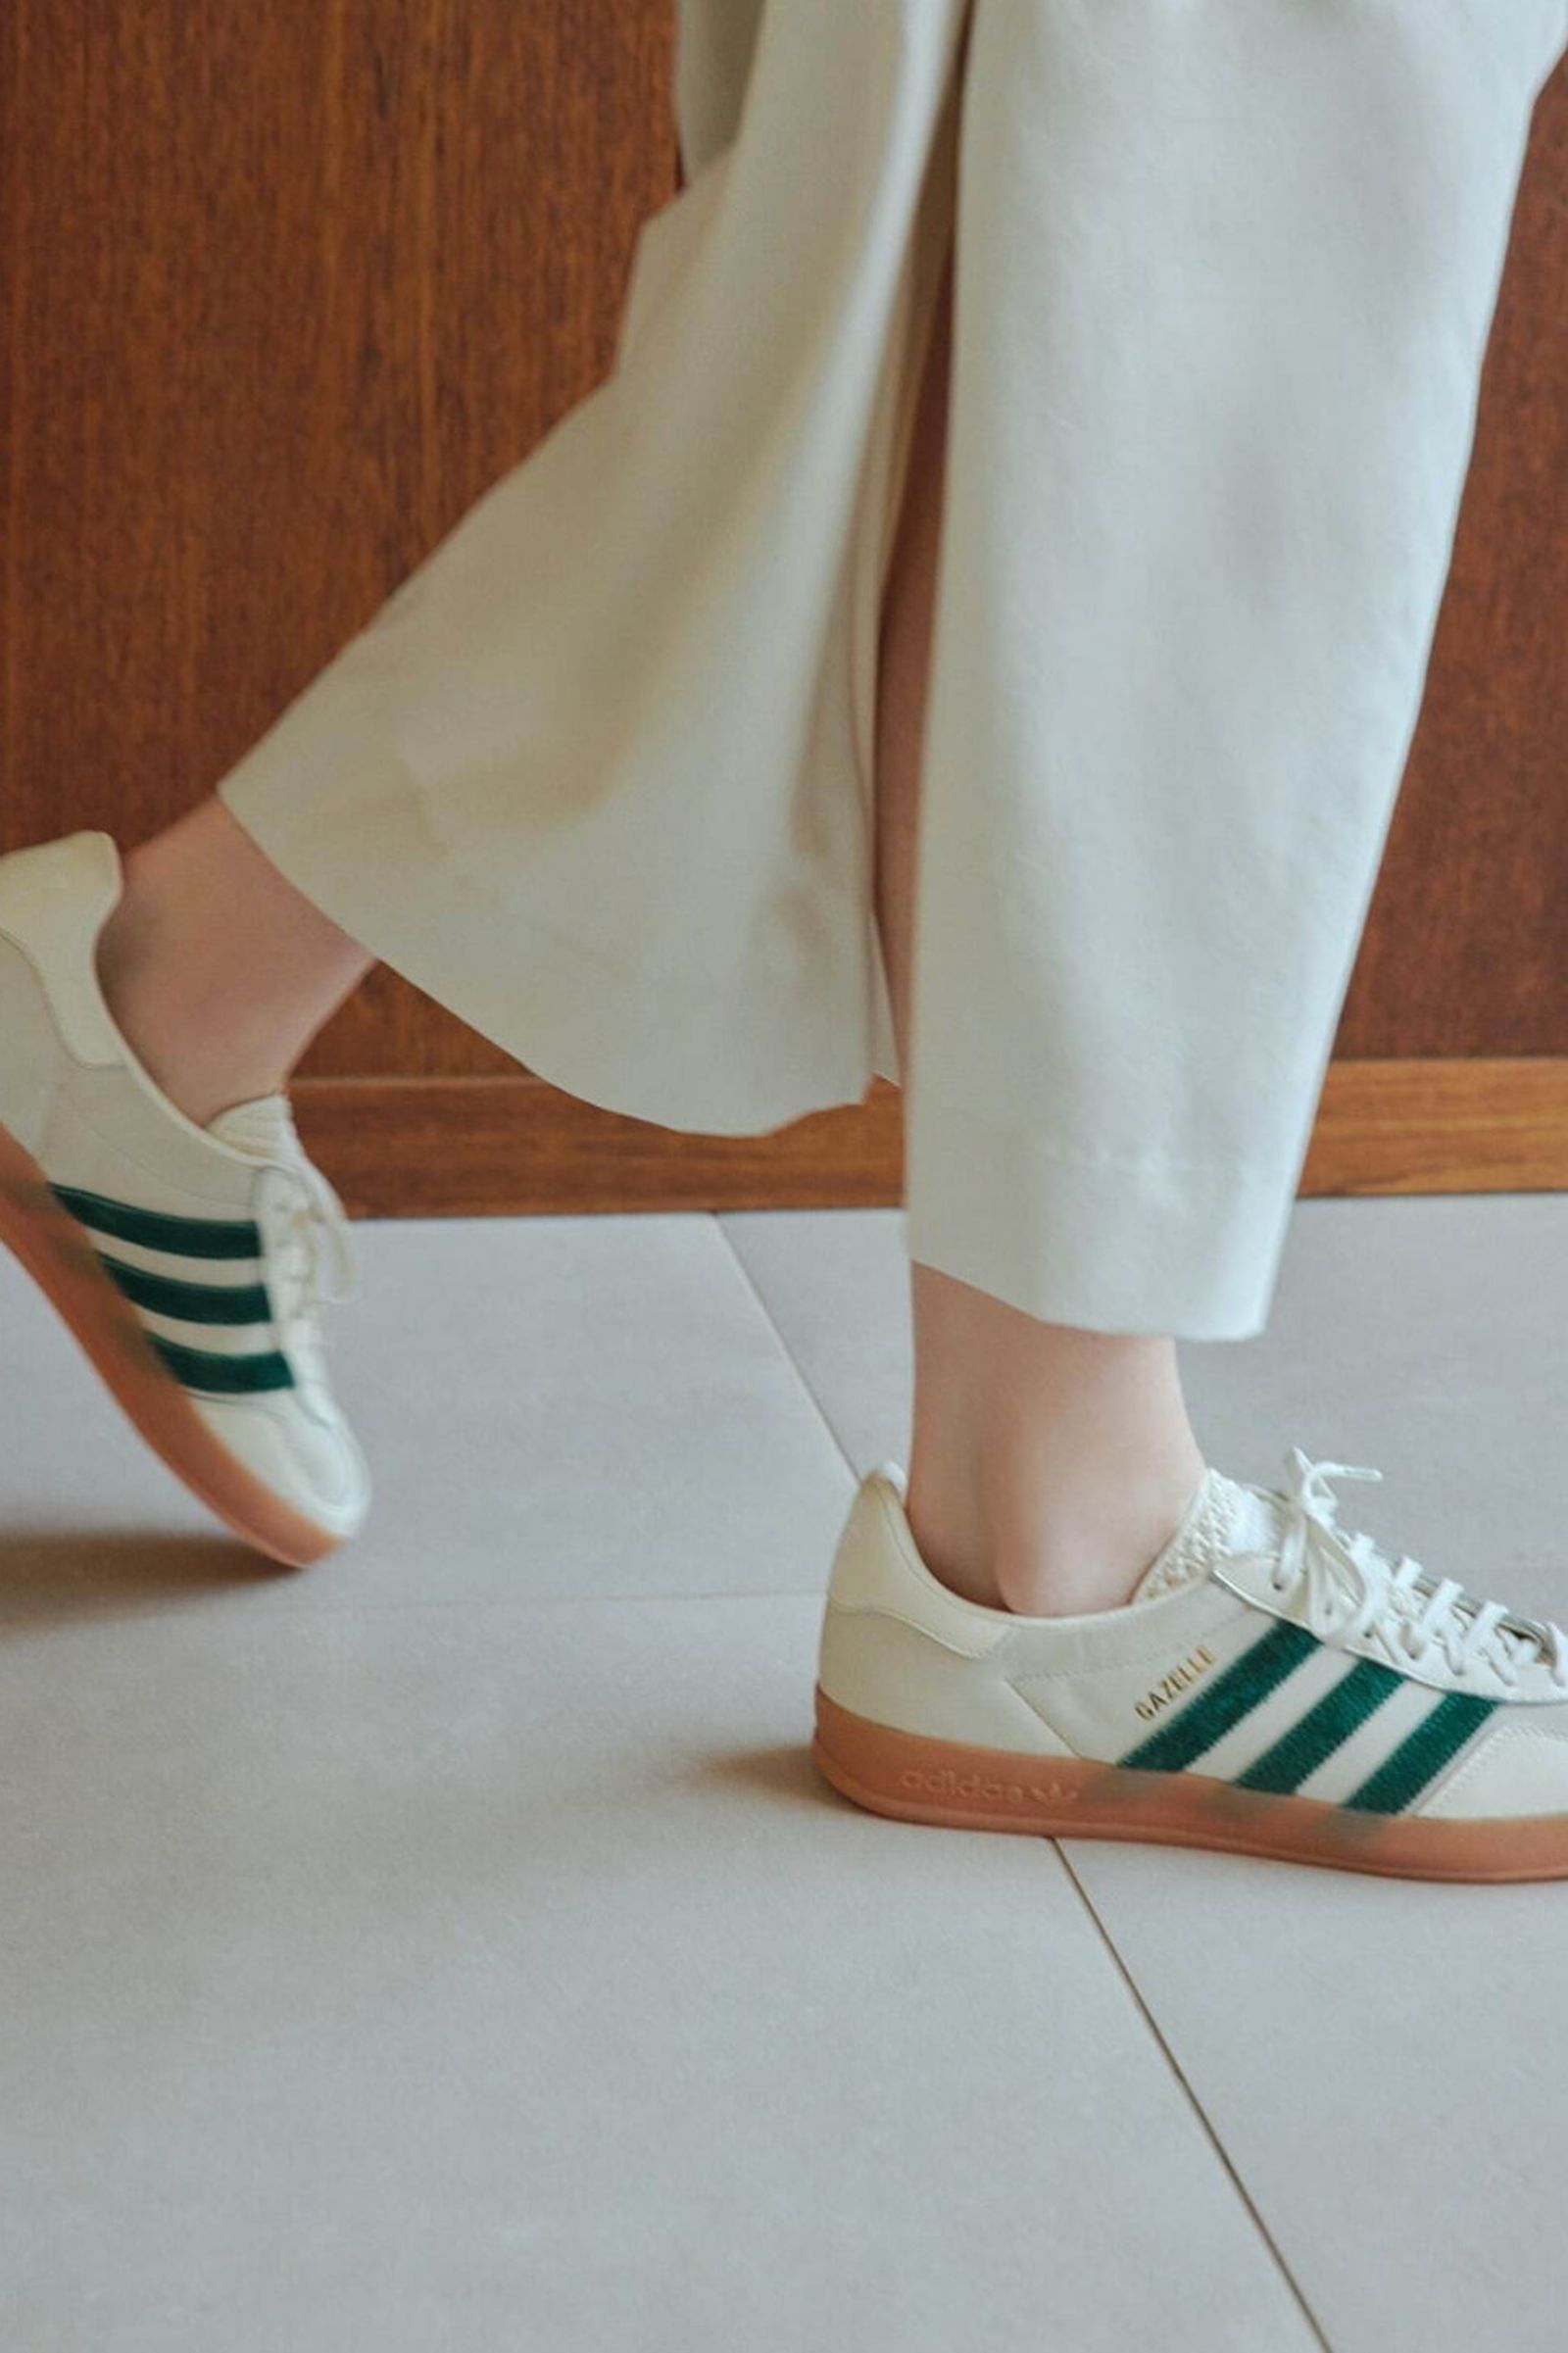 Why Is Suddenly Wearing adidas Gazelles?